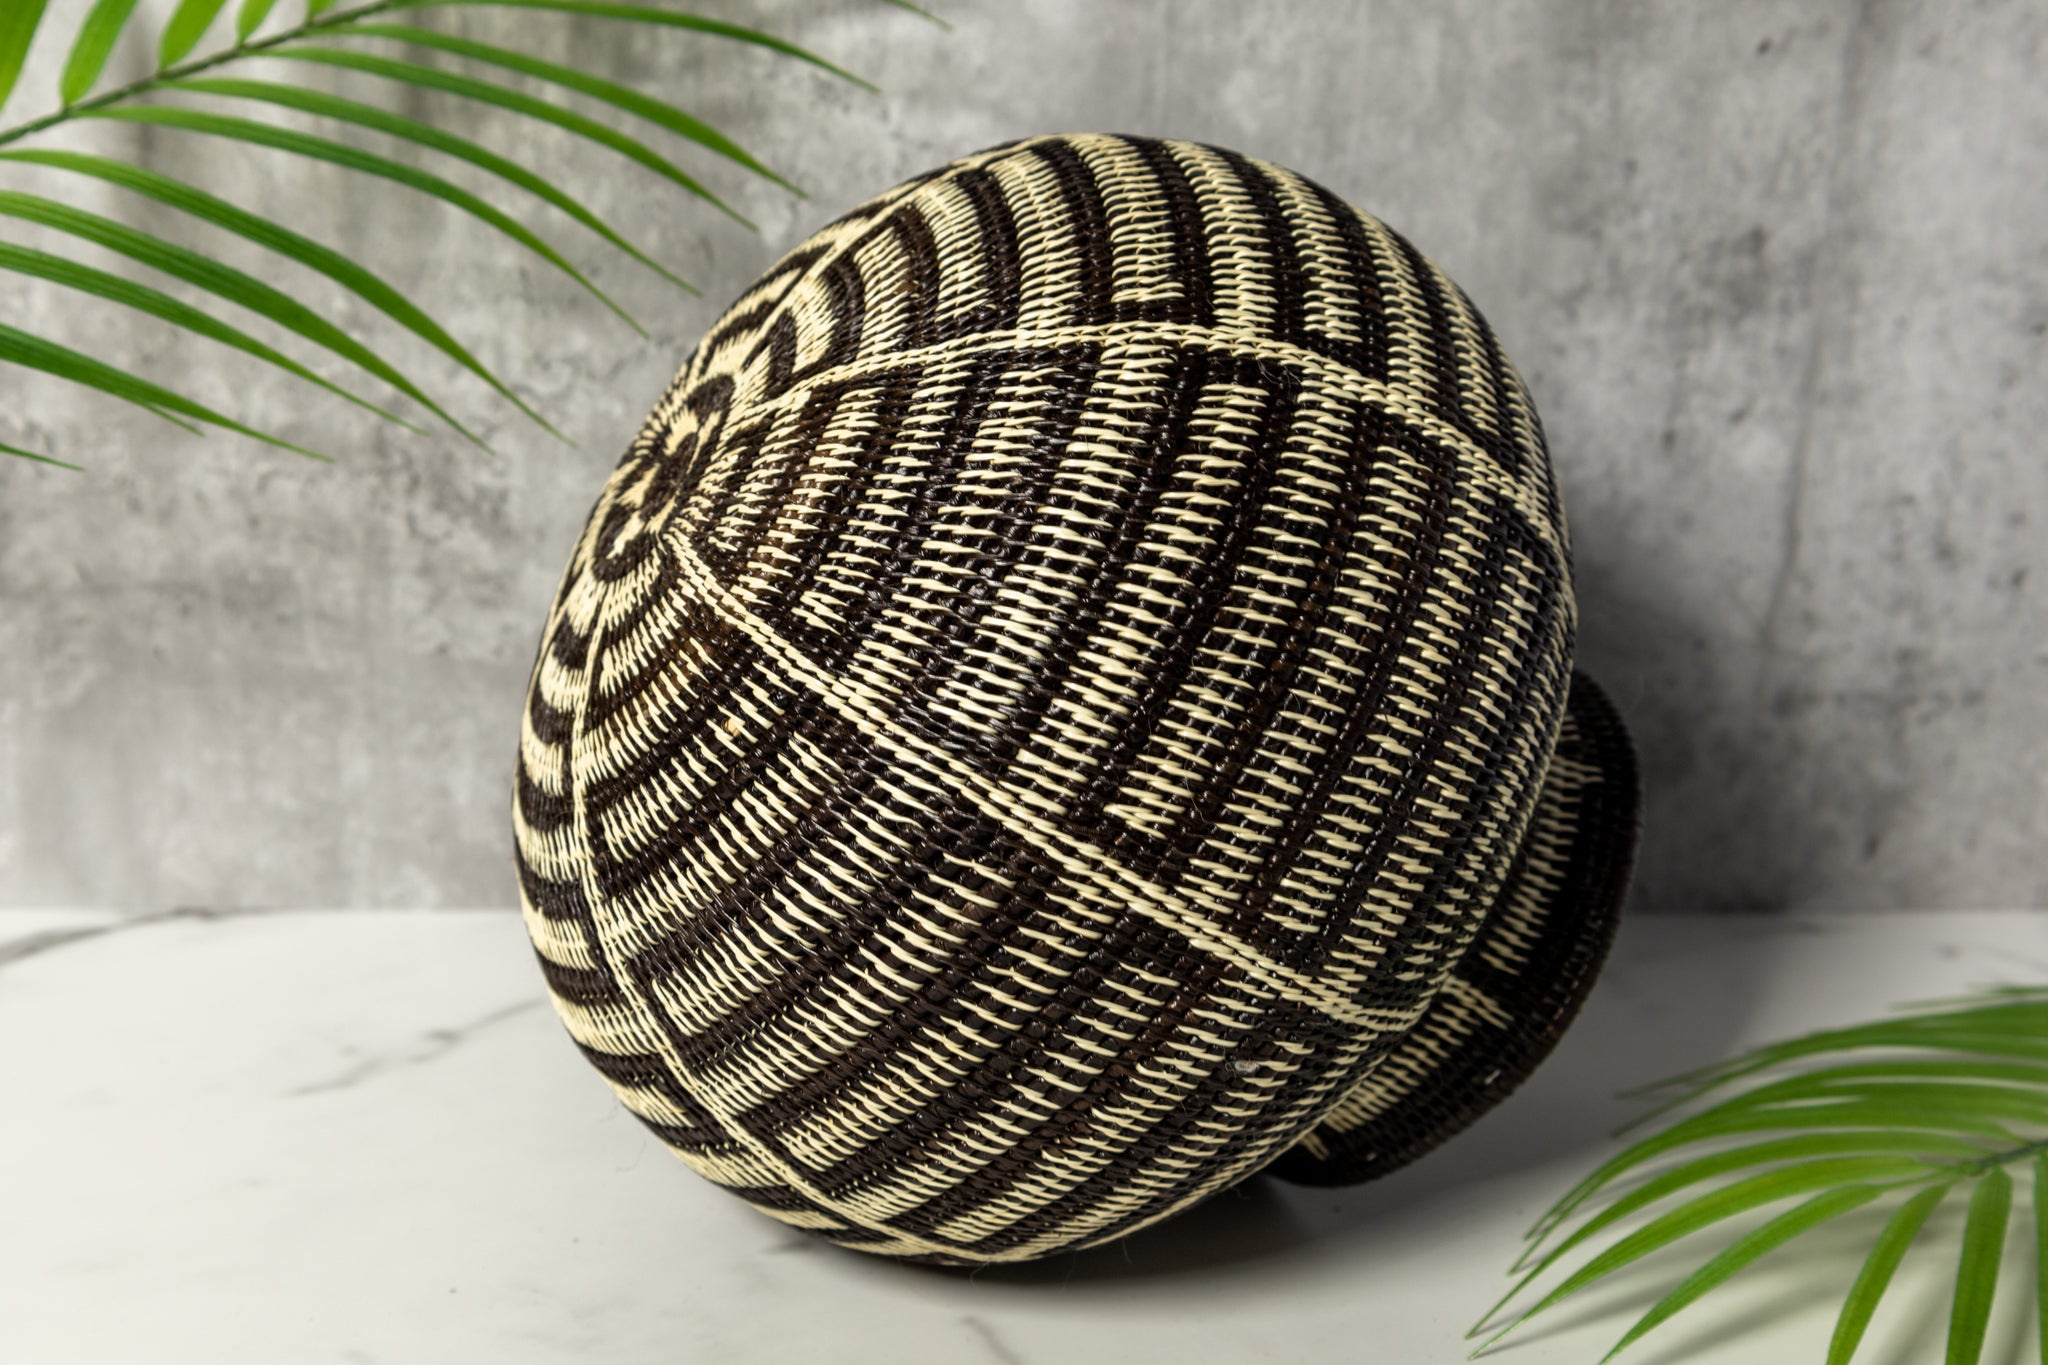 Extraordinary Black And White Woven Basket